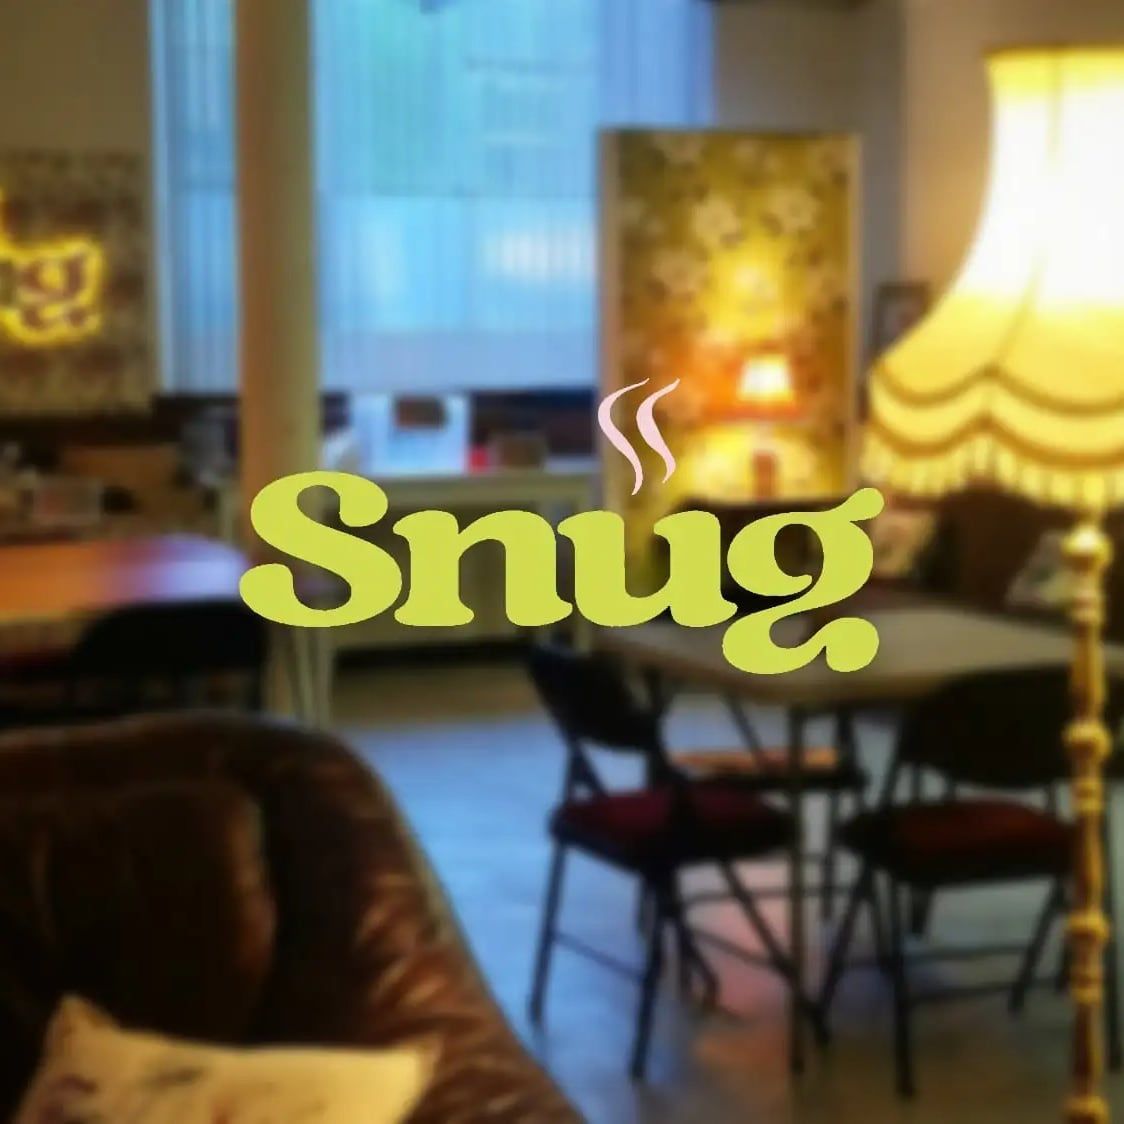 We love SNUG and it’s back tomorrow. It’s a brilliant project at The Anatomy Rooms providing a warm space to reignite your creativity over the cold months. A cosy, welcoming space for you to relax and explore your artistic side. Open every Friday throughout winter.